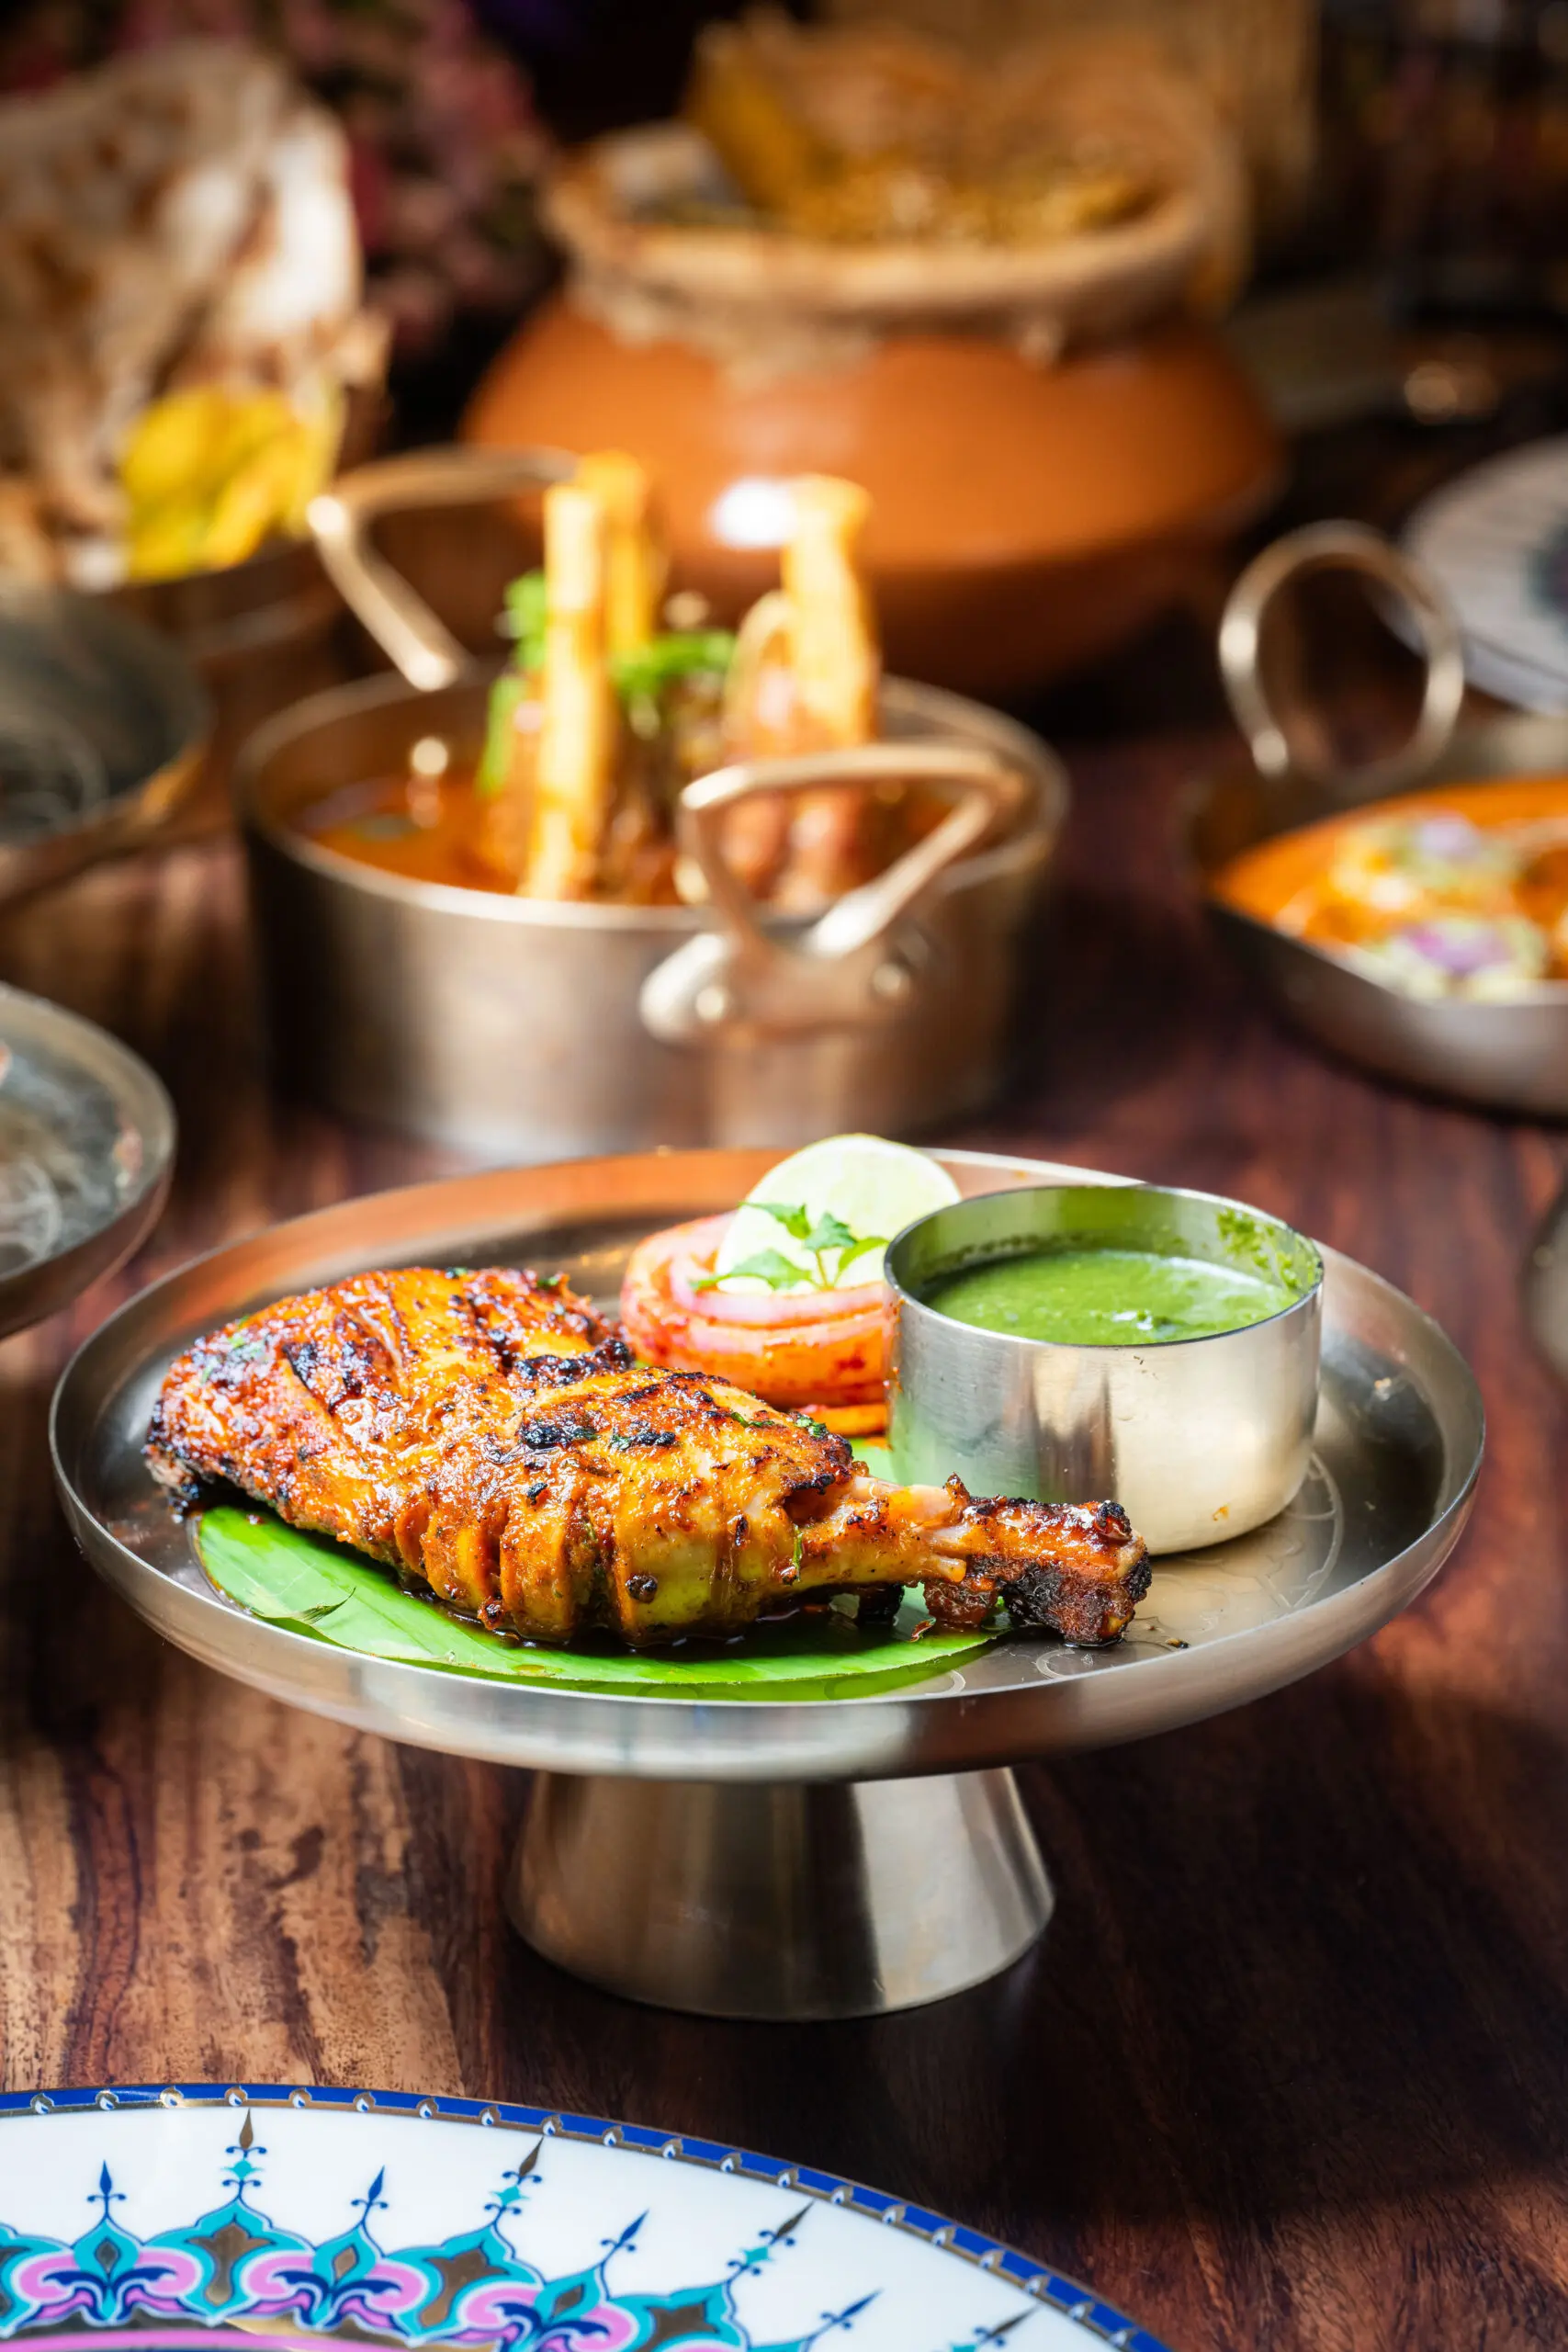 Culinary Delight at ZARF - The Indian Kitchen A Personal Review 